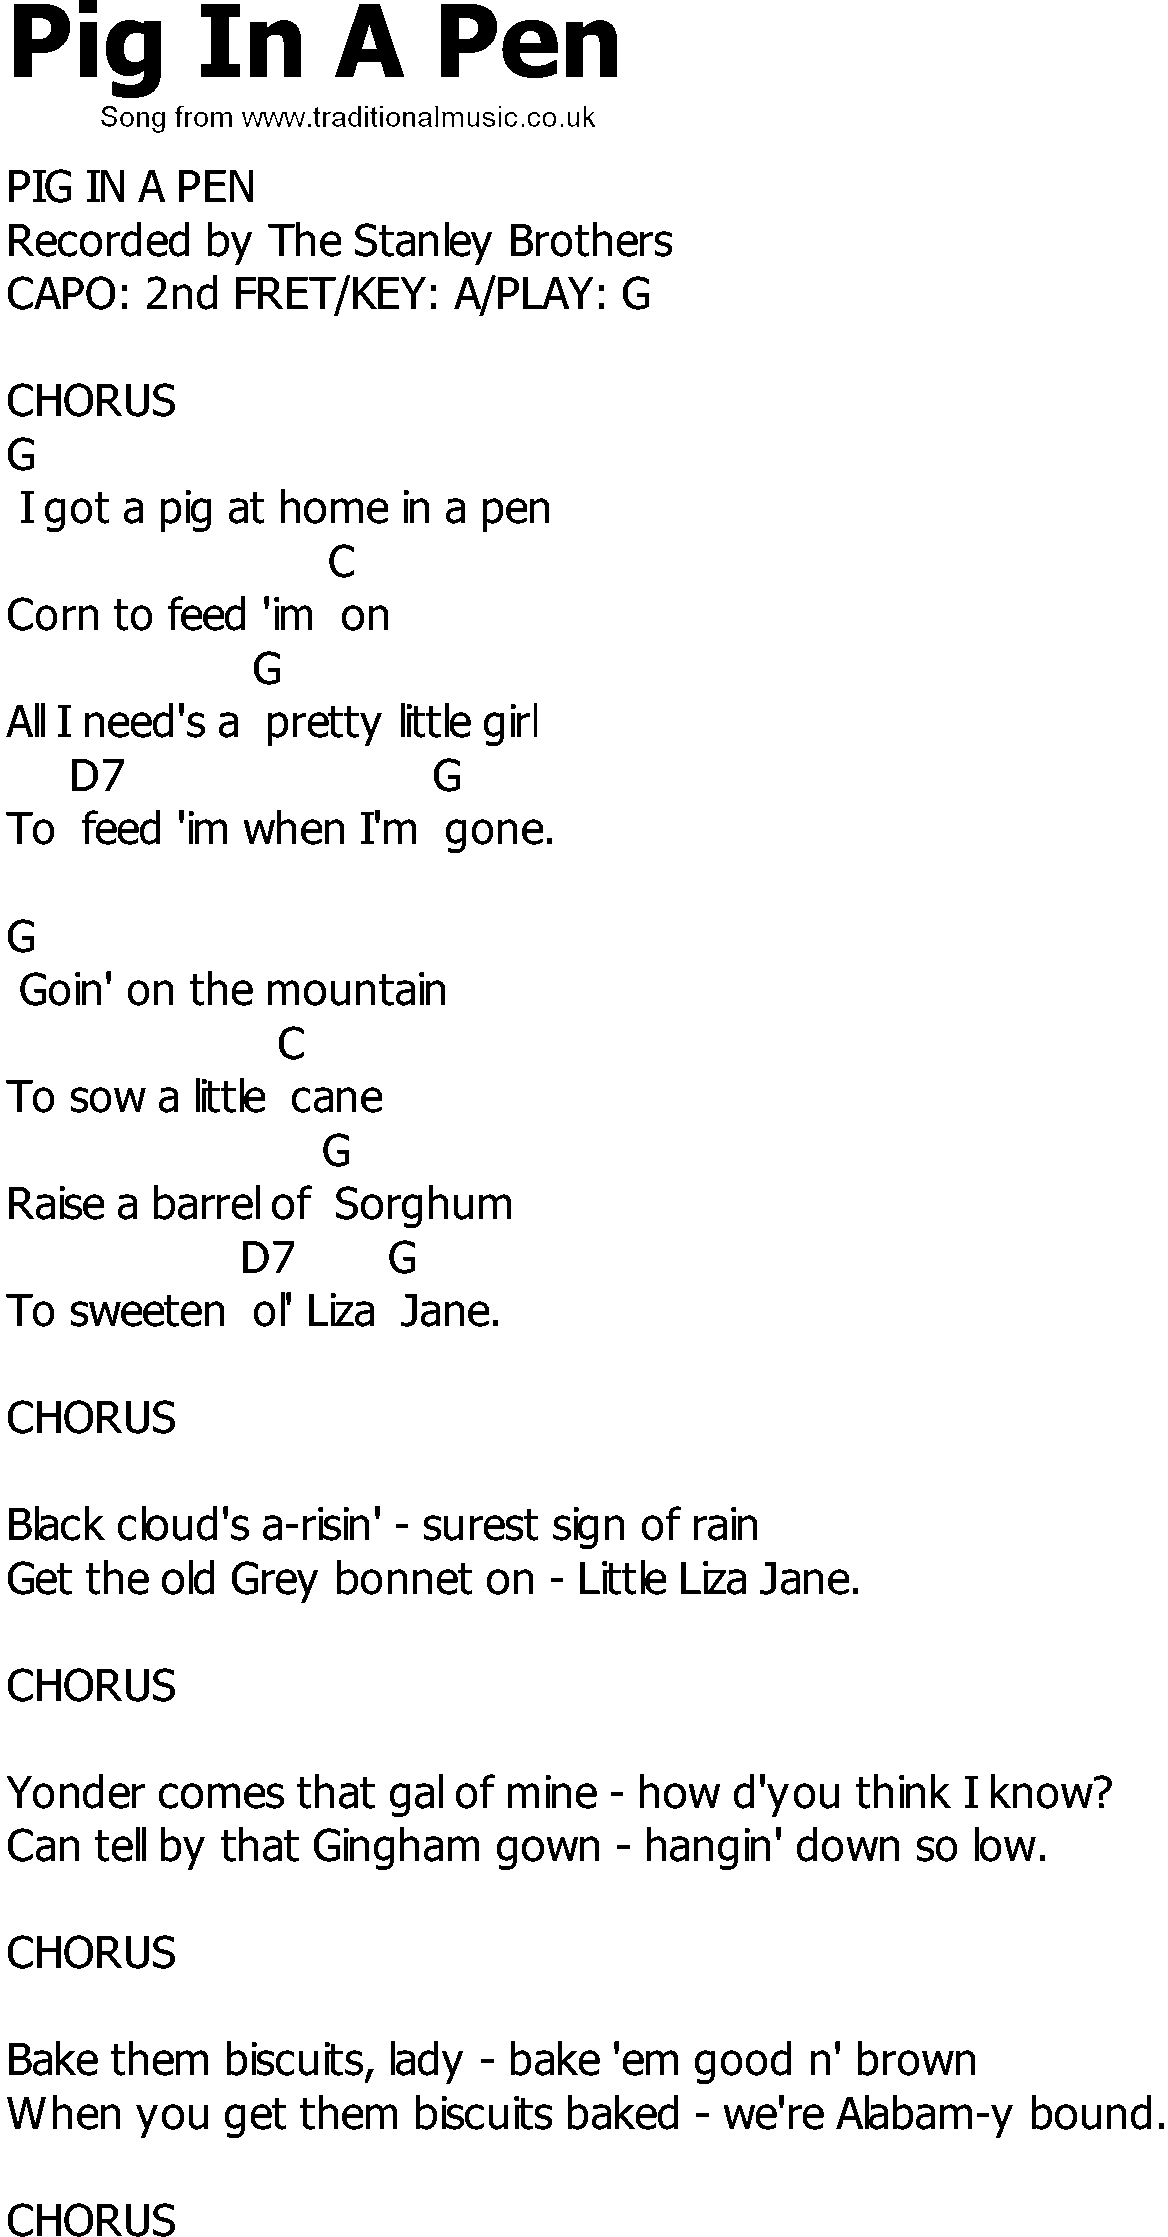 Old Country song lyrics with chords - Pig In A Pen